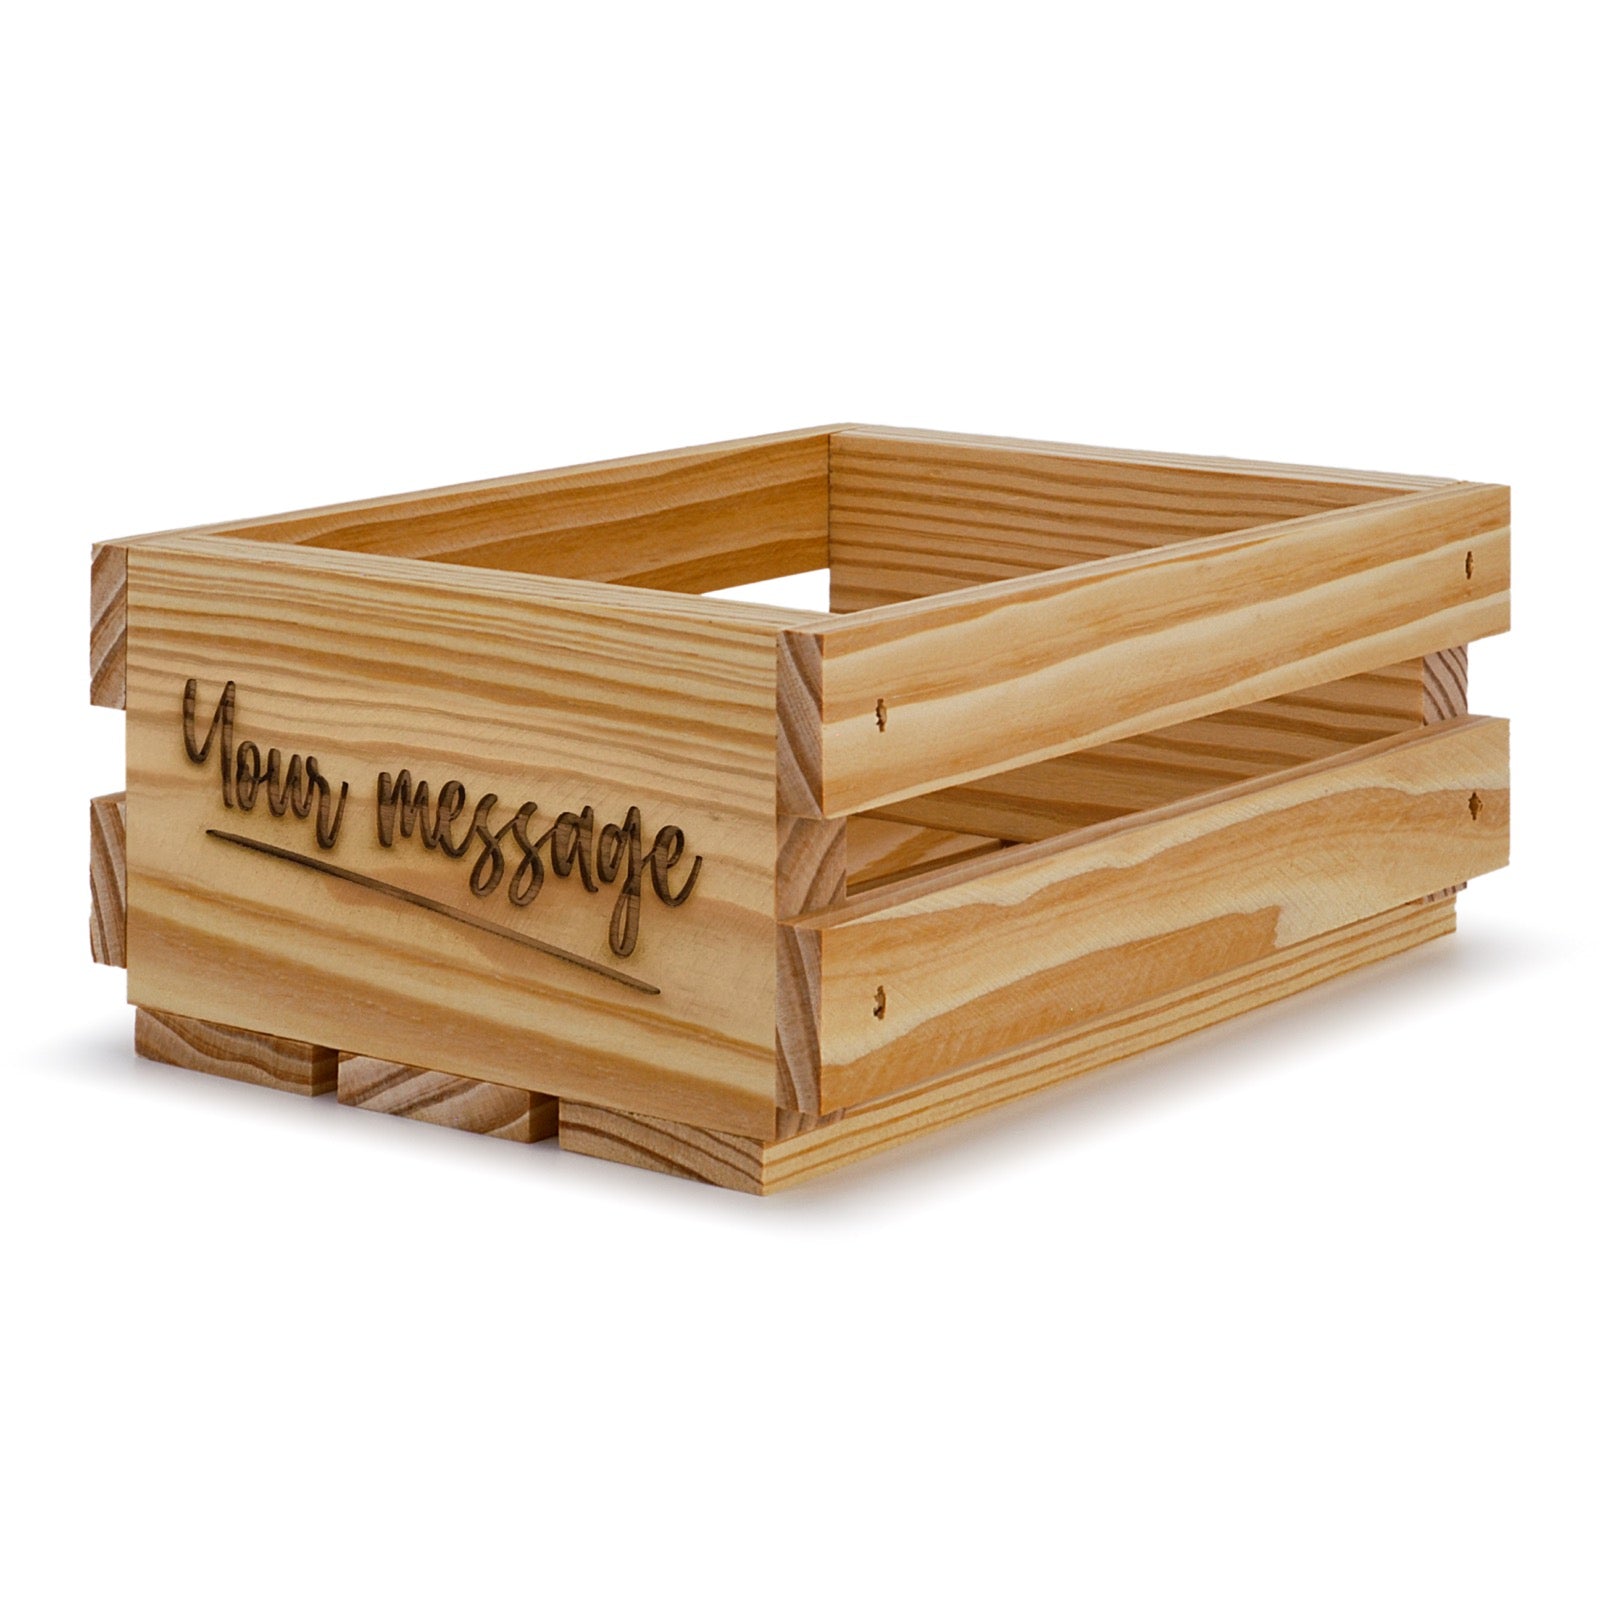 Small wooden crates with your message 8x6x3.5, 6-SS-8-6-3.5-ST-NW-NL, 12-SS-8-6-3.5-ST-NW-NL, 24-SS-8-6-3.5-ST-NW-NL, 48-SS-8-6-3.5-ST-NW-NL, 96-SS-8-6-3.5-ST-NW-NL